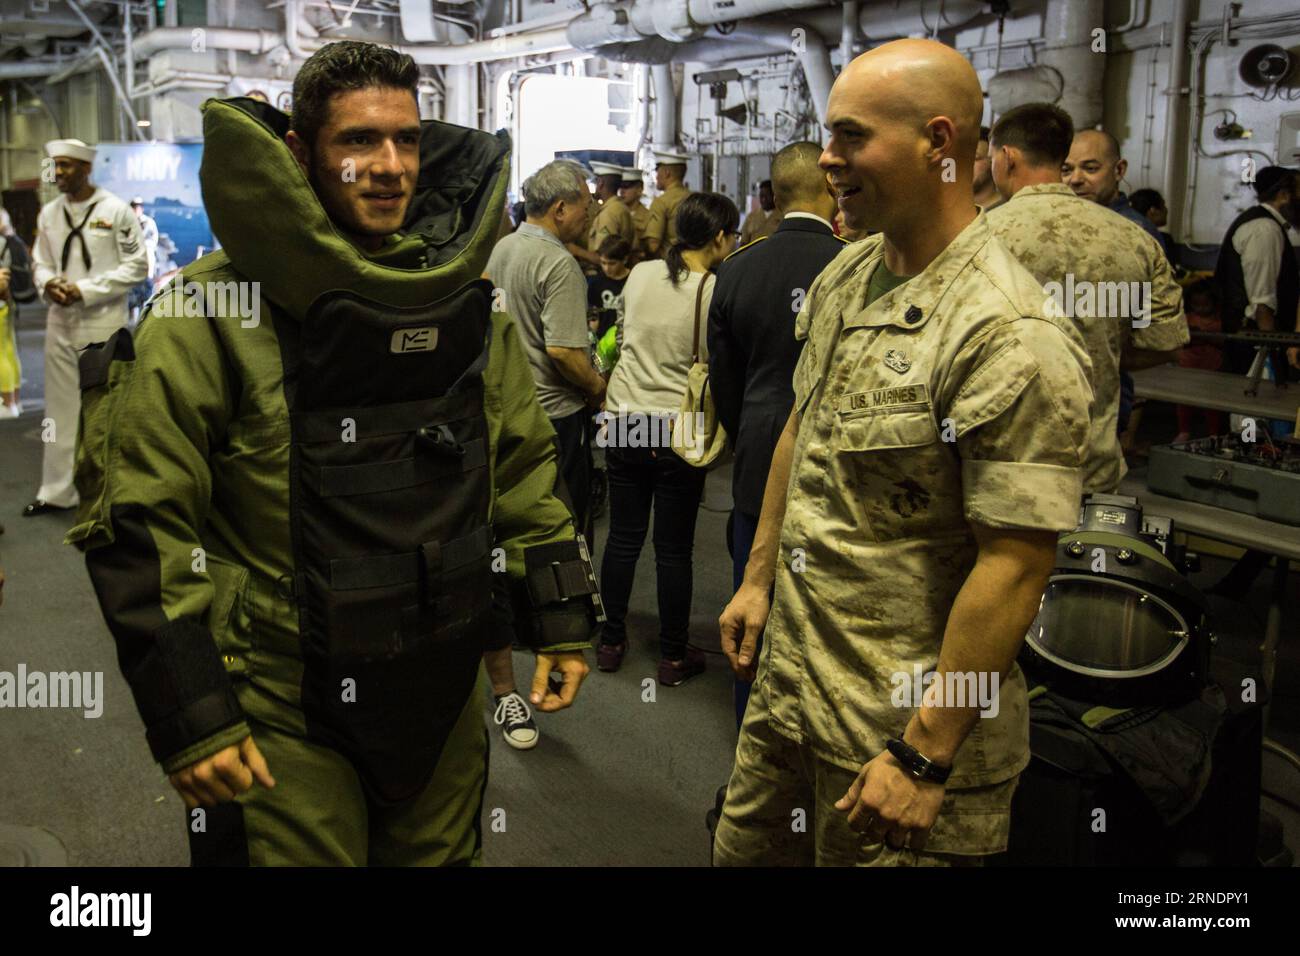 A visitor (L) tries on the Explosive Ordnance Disposal (EOD) suit on board the USS Bataan (LHD-5), Wasp-class amphibious assault ship, during the 28th Annual New York Fleet Week in New York, the United States on May 27, 2016. New York Fleet Week takes place from May 25 to May 30, where hundred of service men and women in the Armed Forces visit New York City as part of Memorial Day commemorations. ) U.S.-NEW YORK-FLEET WEEK-USS BATAAN LixMuzi PUBLICATIONxNOTxINxCHN   a Visitor l tries ON The Explosive Ordnance Disposal EOD Suit ON Board The USS Bataan LHD 5 Wasp Class Amphibious Assault Ship du Stock Photo